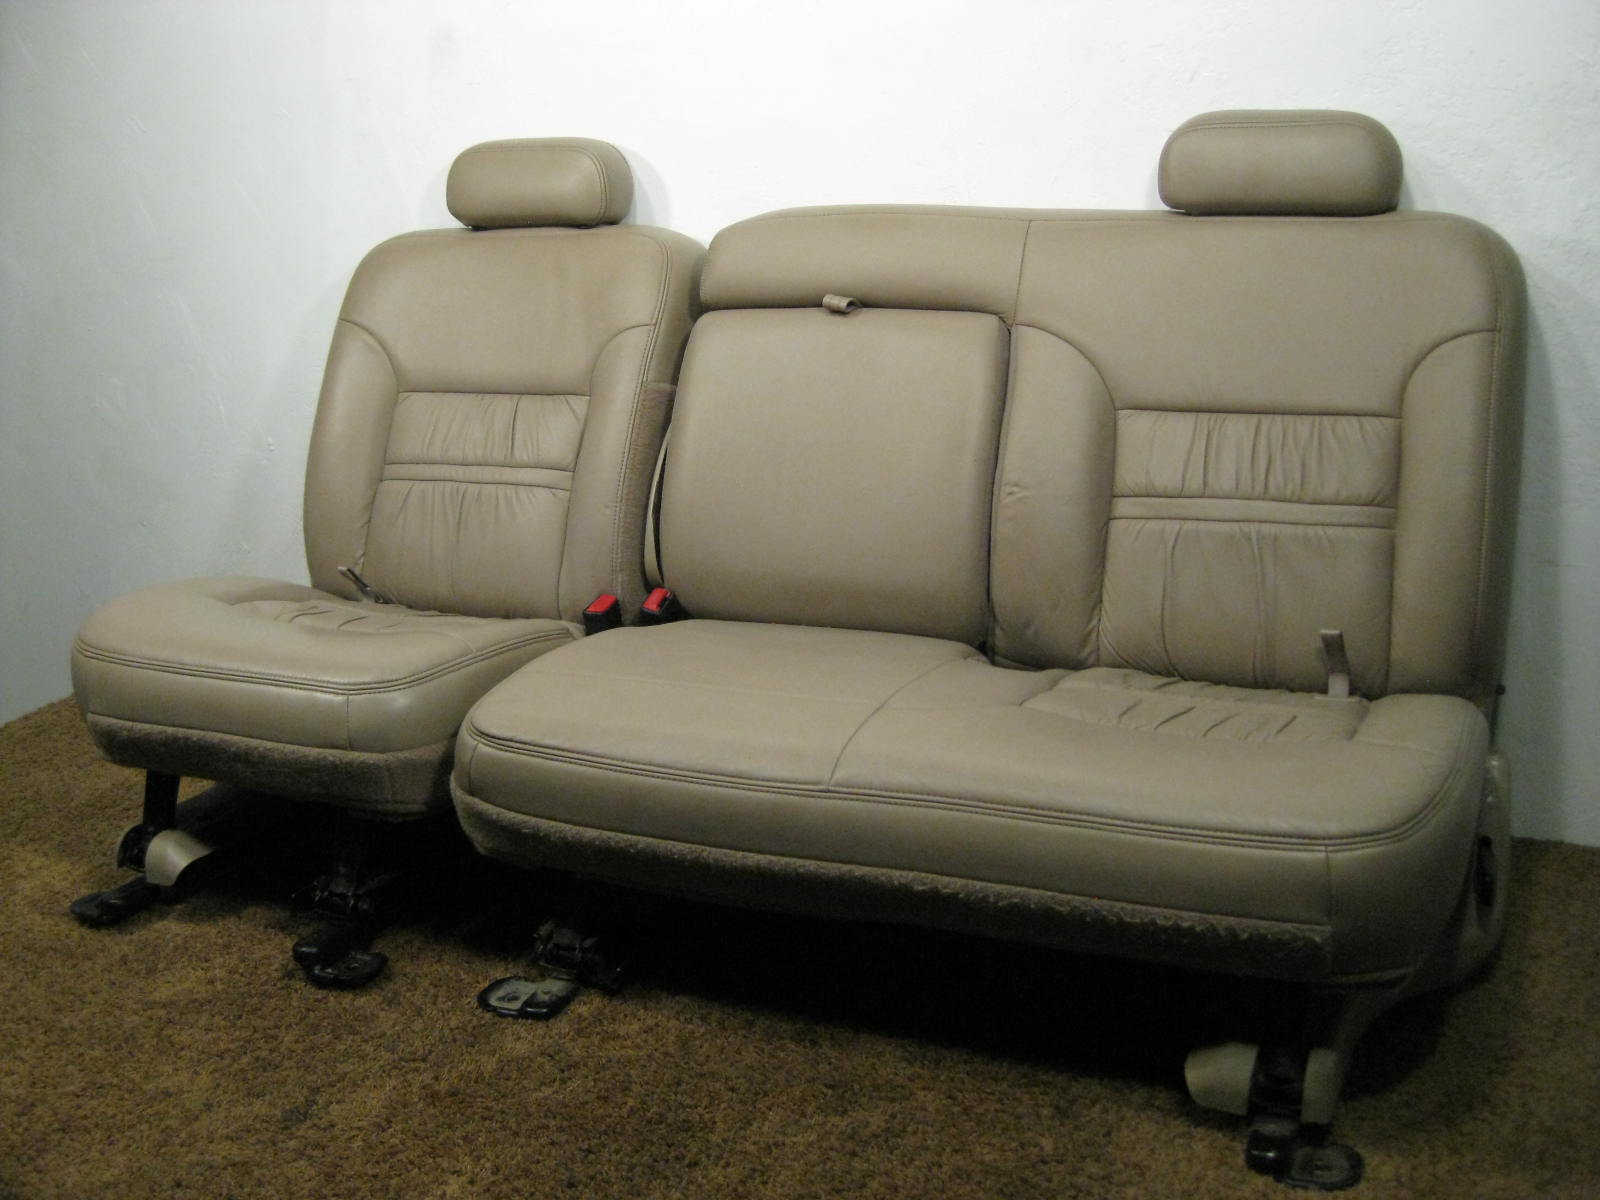 ford excursion number of seats